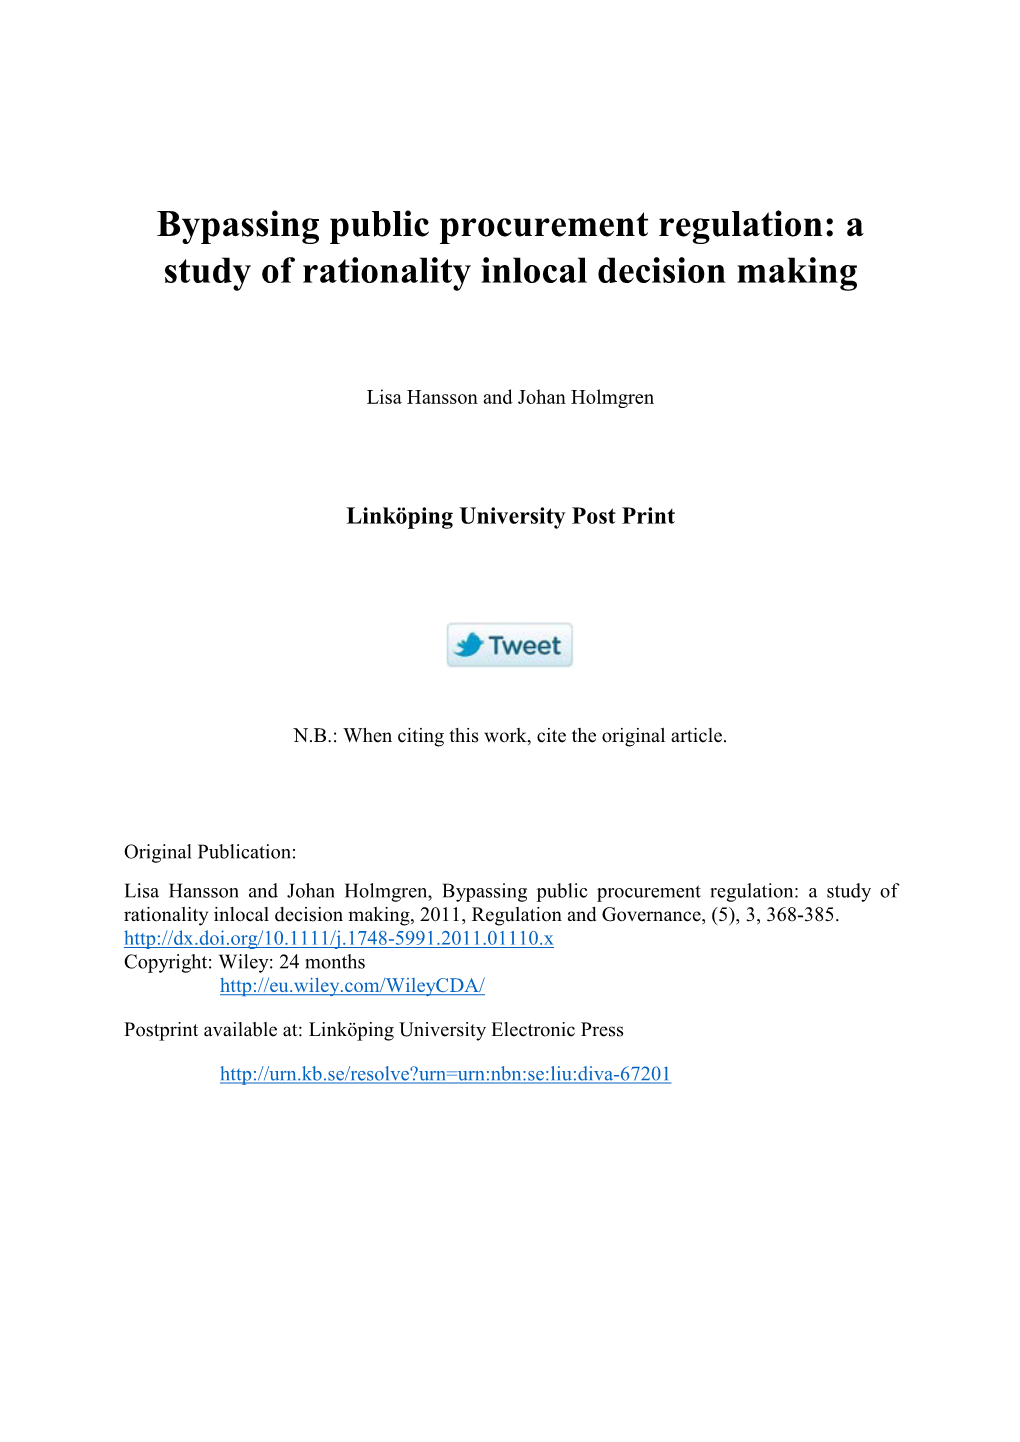 Bypassing Public Procurement Regulation: a Study of Rationality Inlocal Decision Making